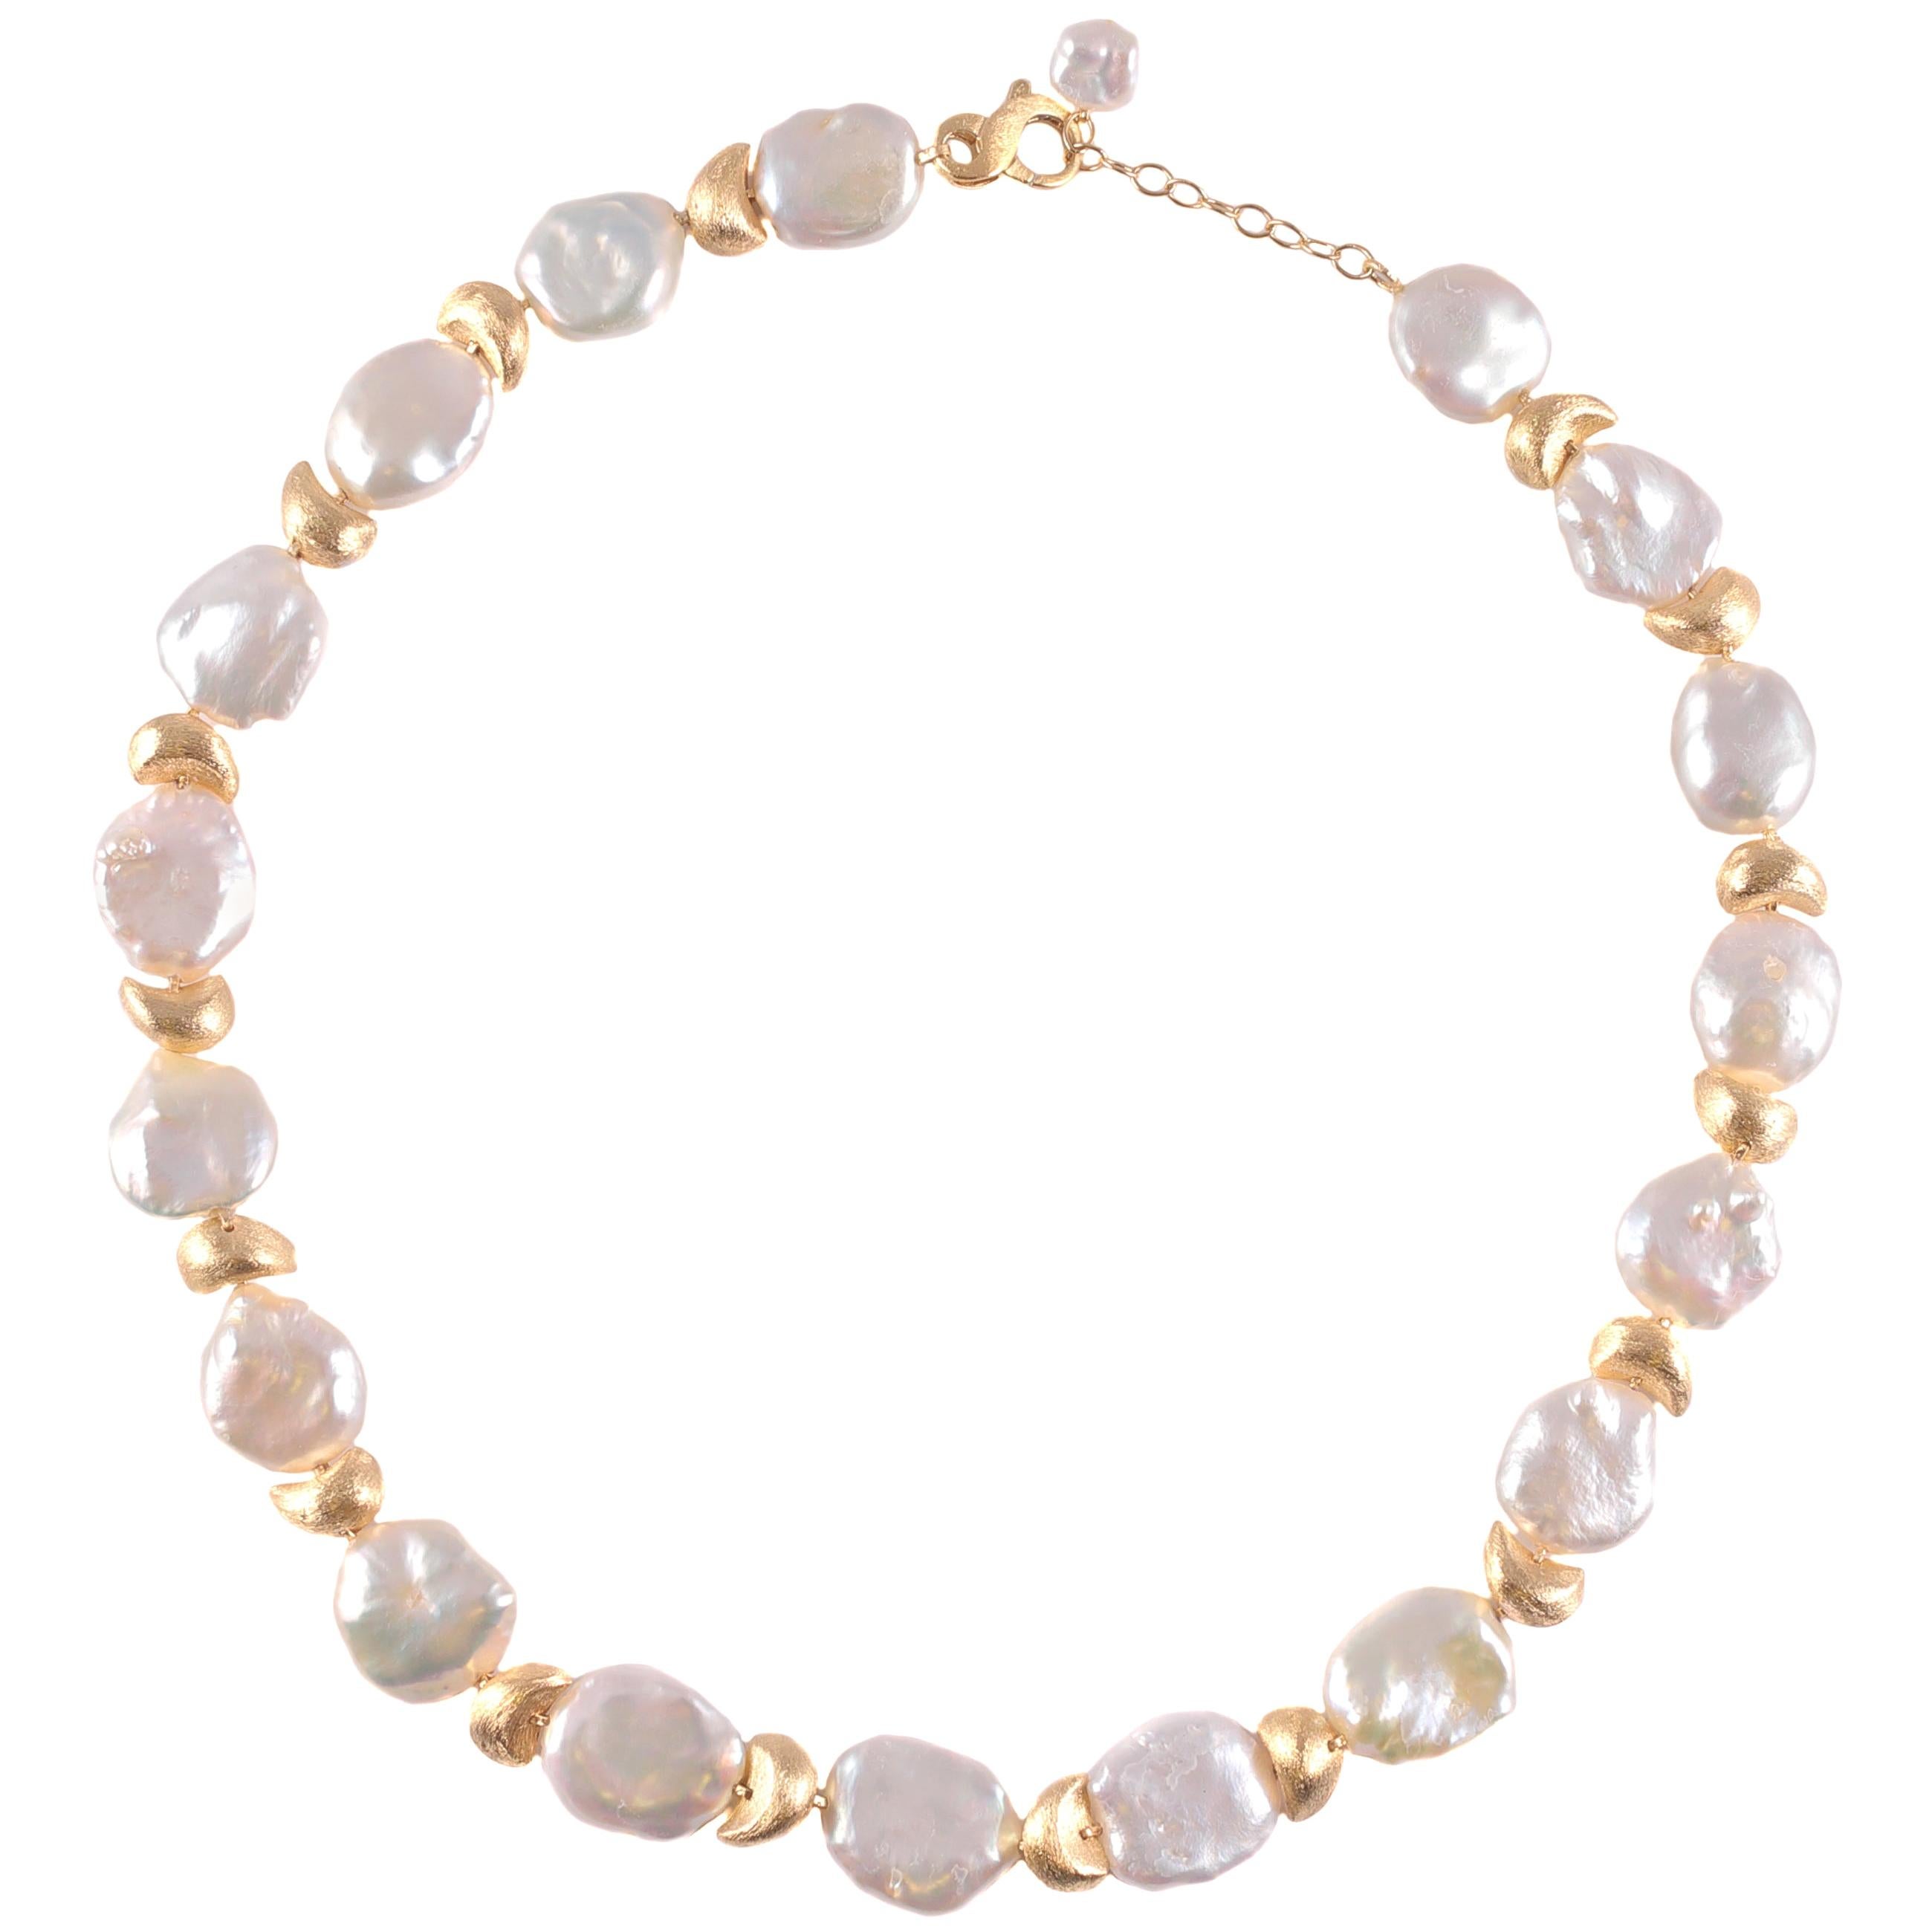 Yvel Keshi Pearl Yellow Gold Necklace from the Satin Finish Collection